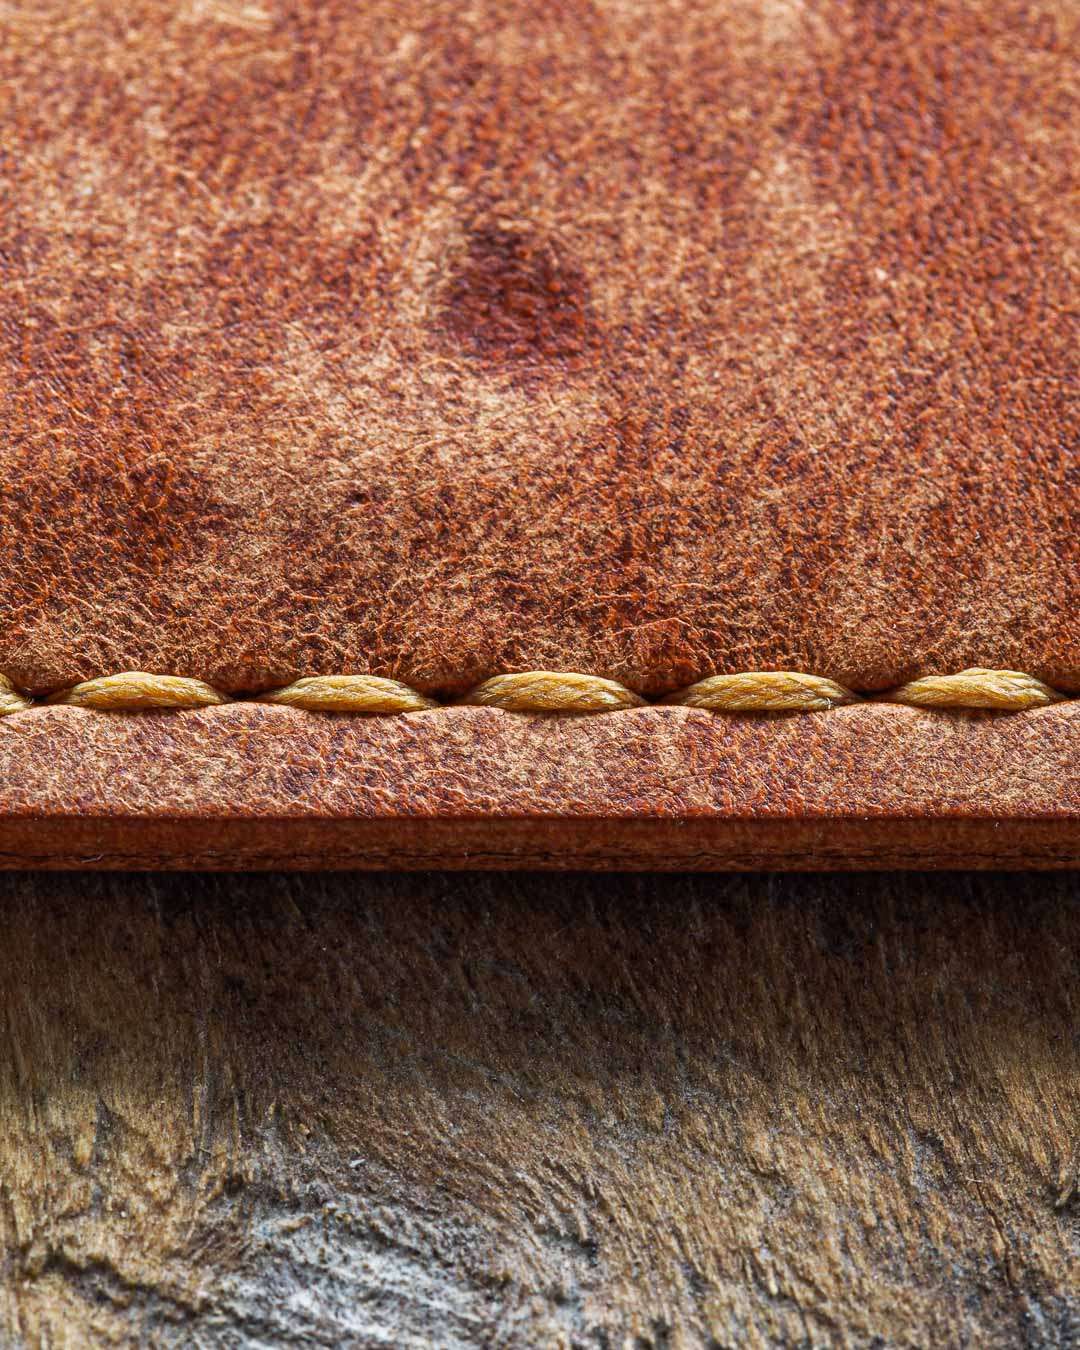 Luava handmade leather wallet handcrafted leatherwallet cardholder card holder cardwallet vegetable tanned absolute stitching detail